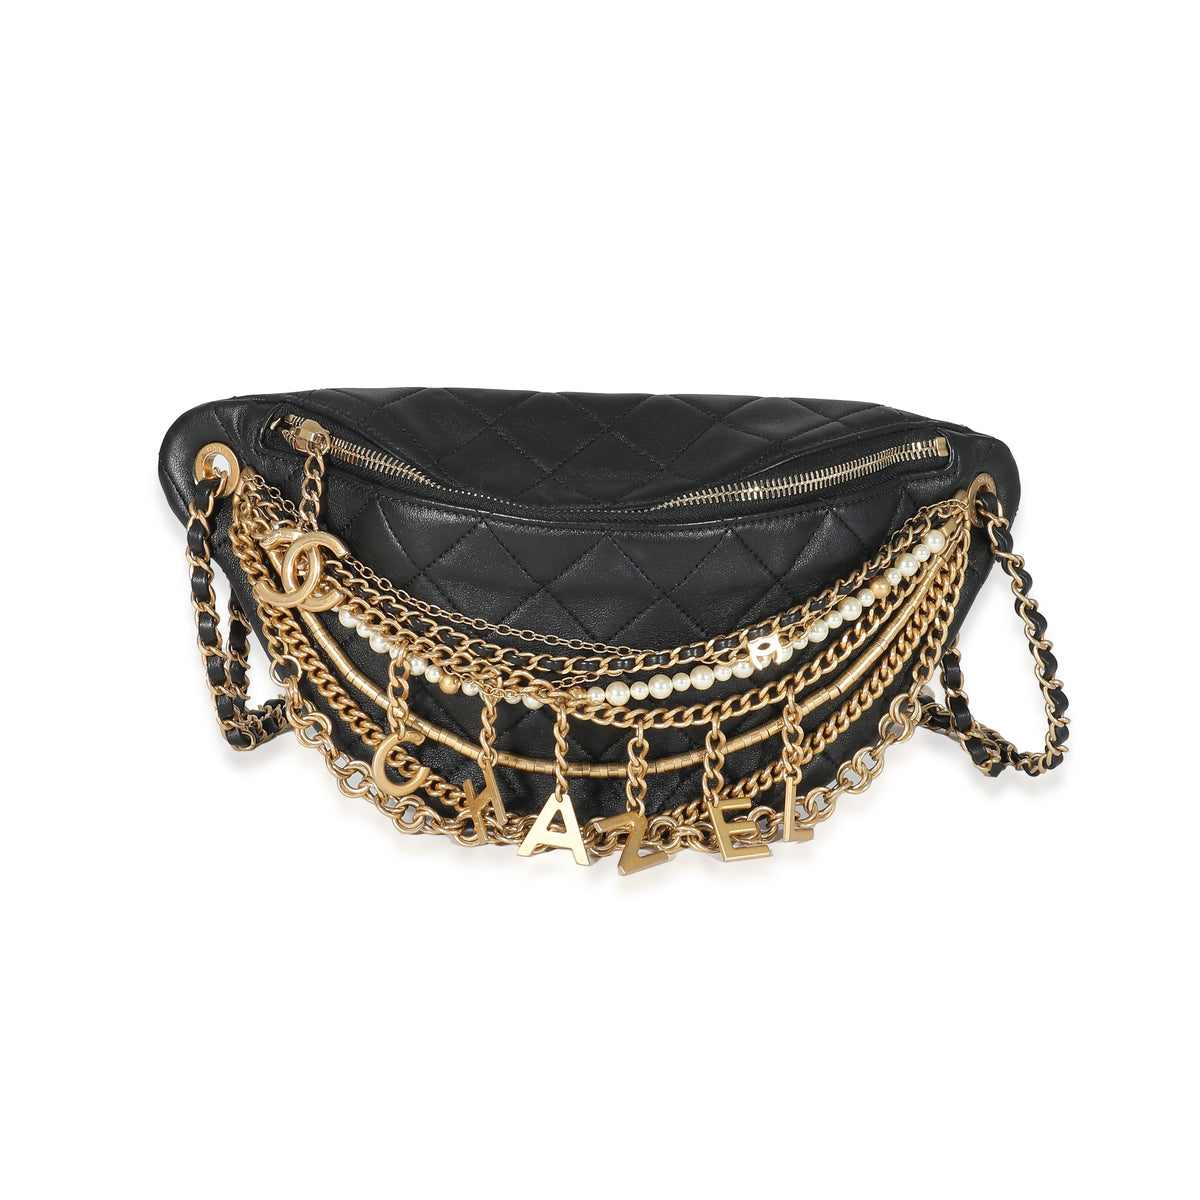 Chanel Black Quilted Lambskin All About Chains Waist Bag, myGemma, DE